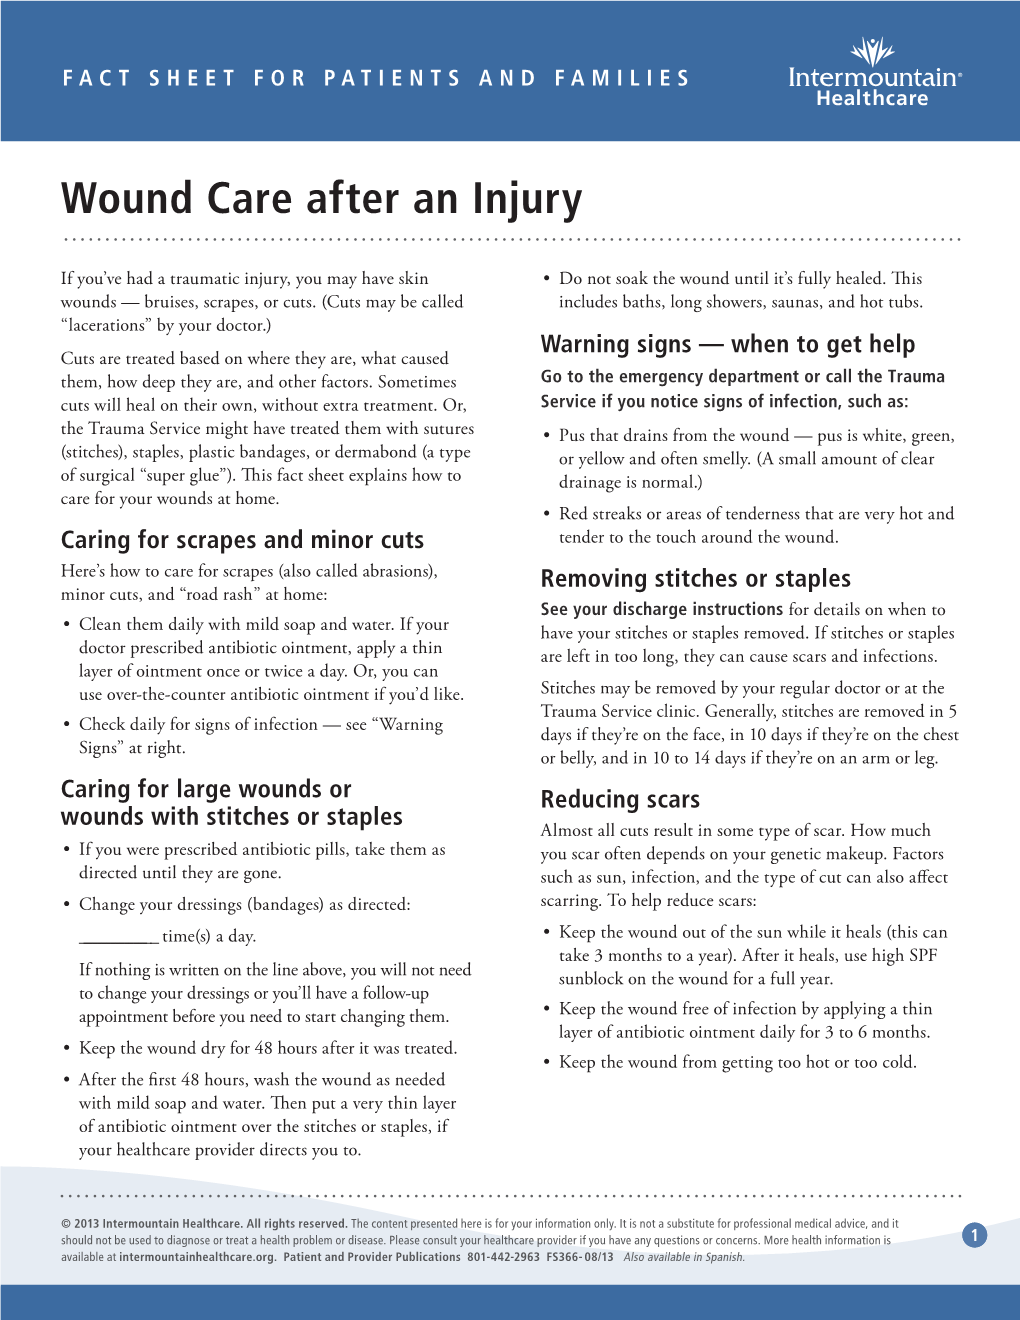 Wound Care After an Injury